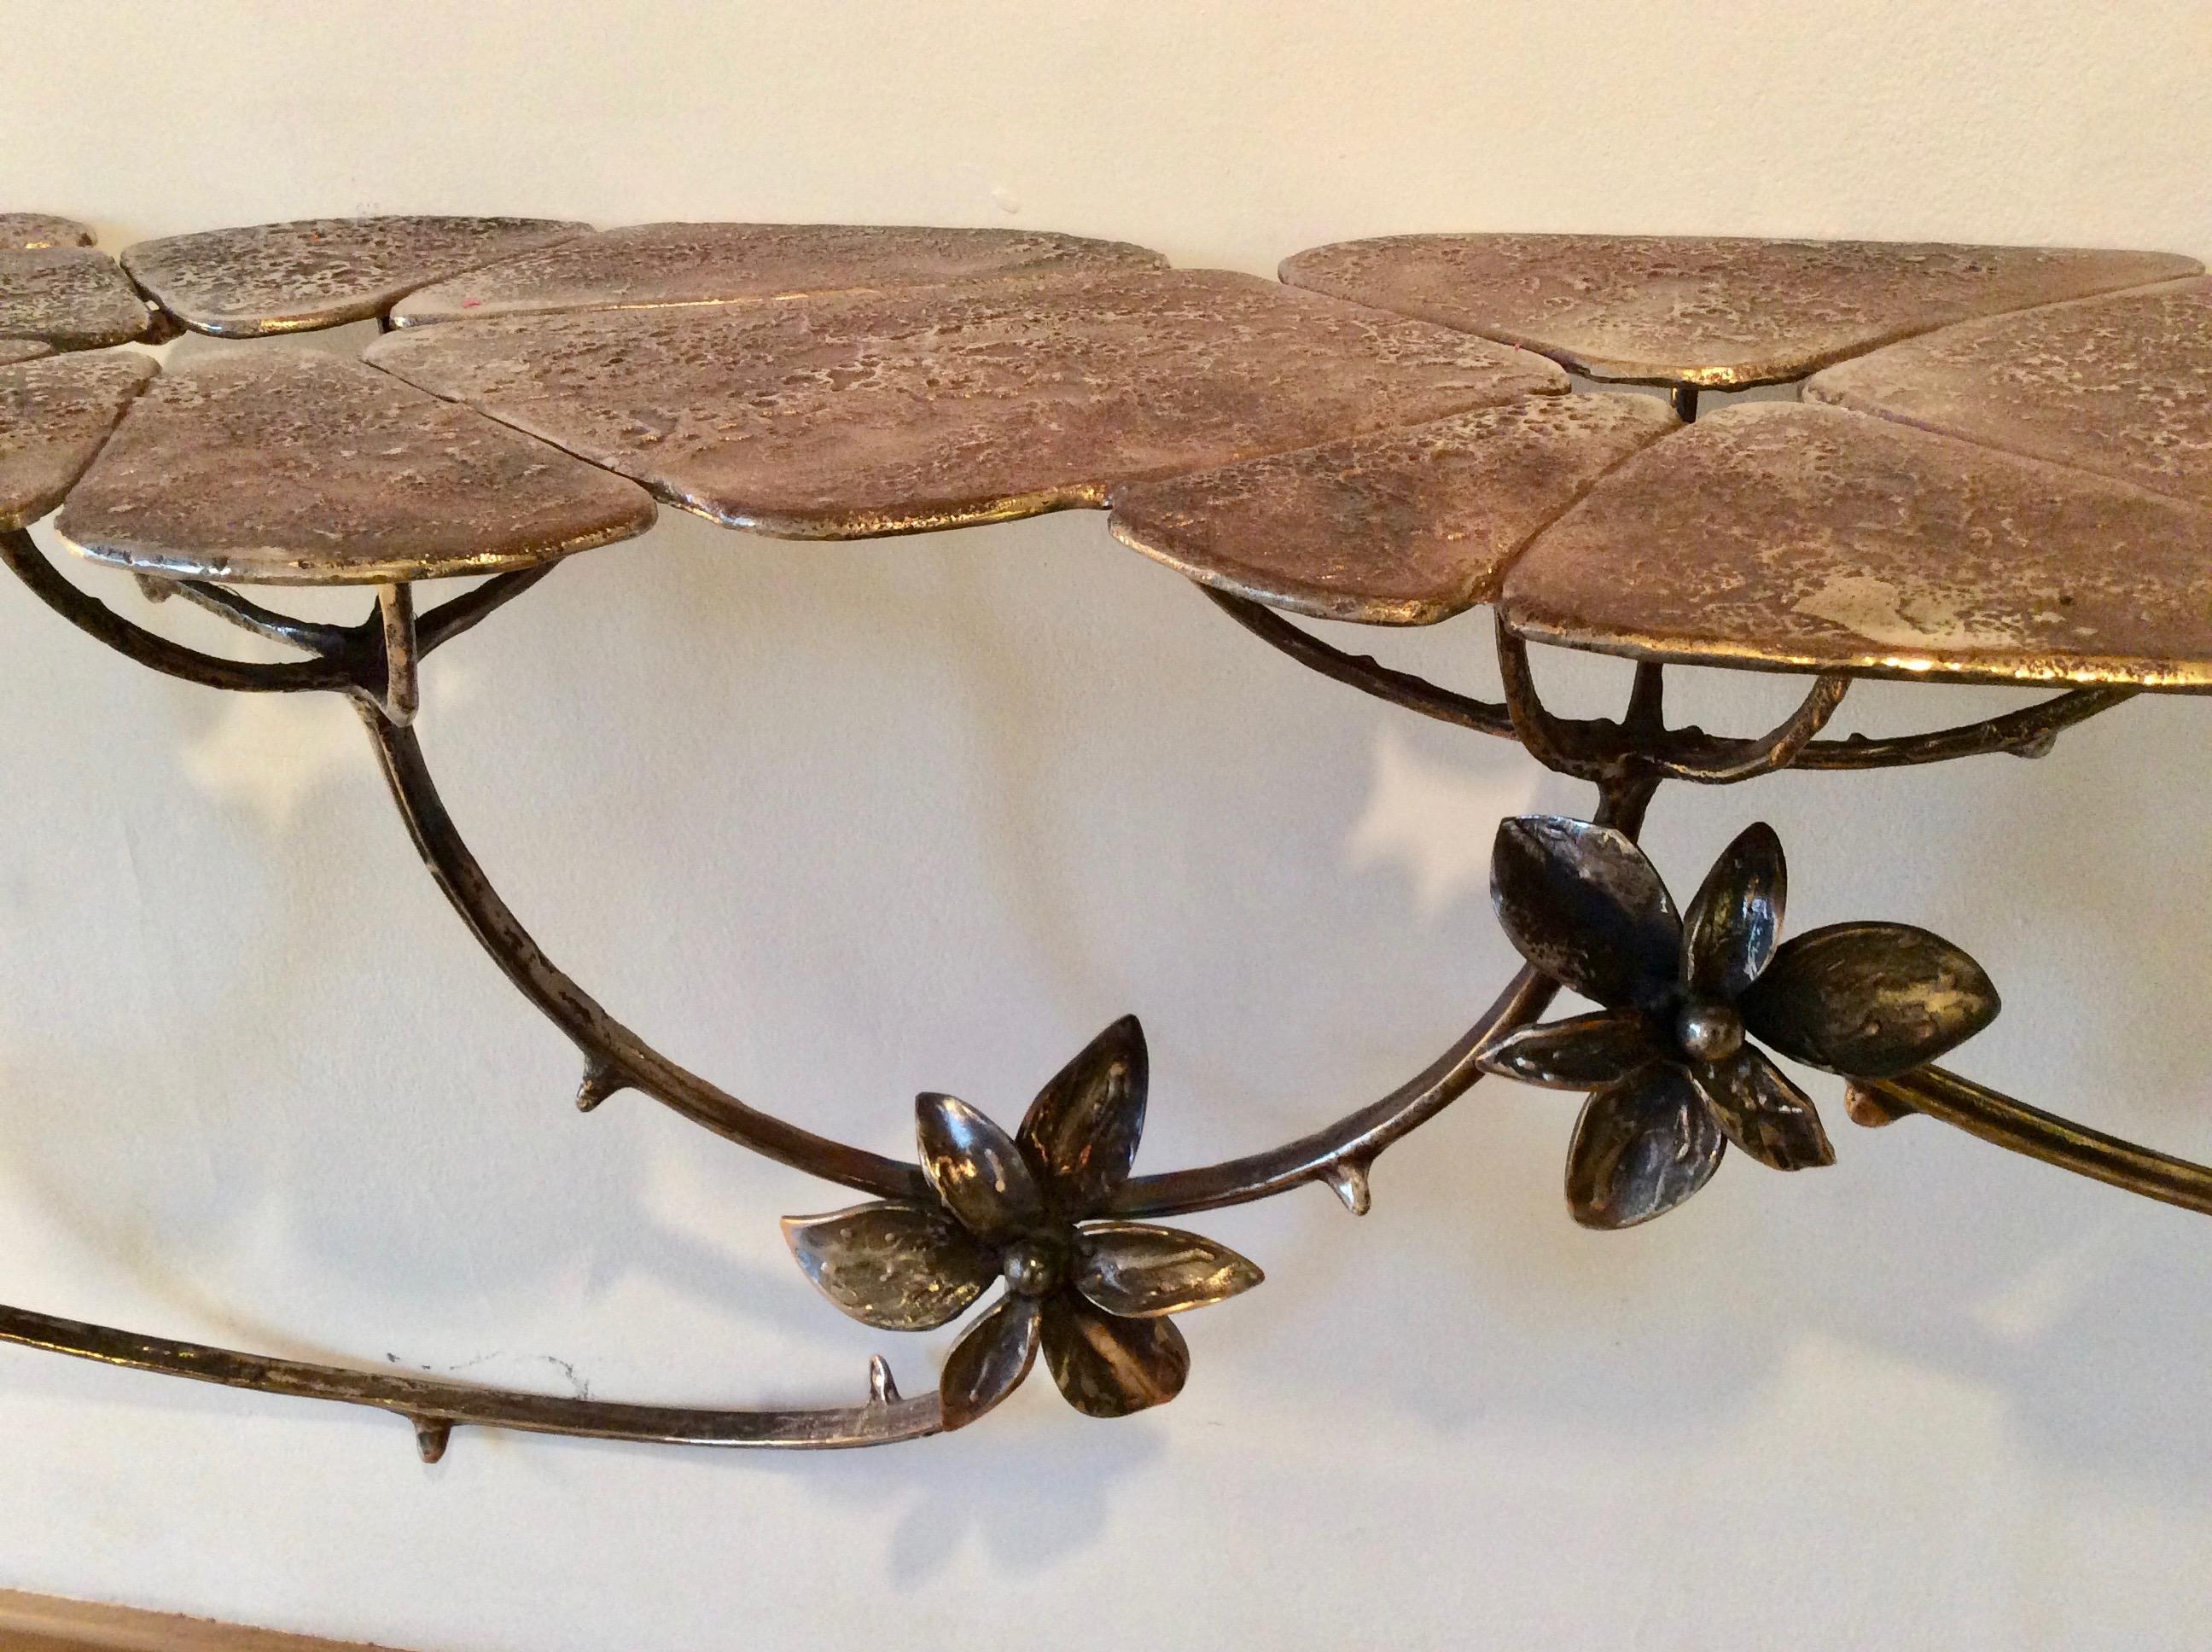 A enchanting, organic wall-mounted console by British artist, Mark Brazier-Jones. Cast in bronze, the top surface formed as 'leaves' whose blossoming tendrils form the support of the console.
Signed and dated 'Mark Brazier-Jones 2019'.